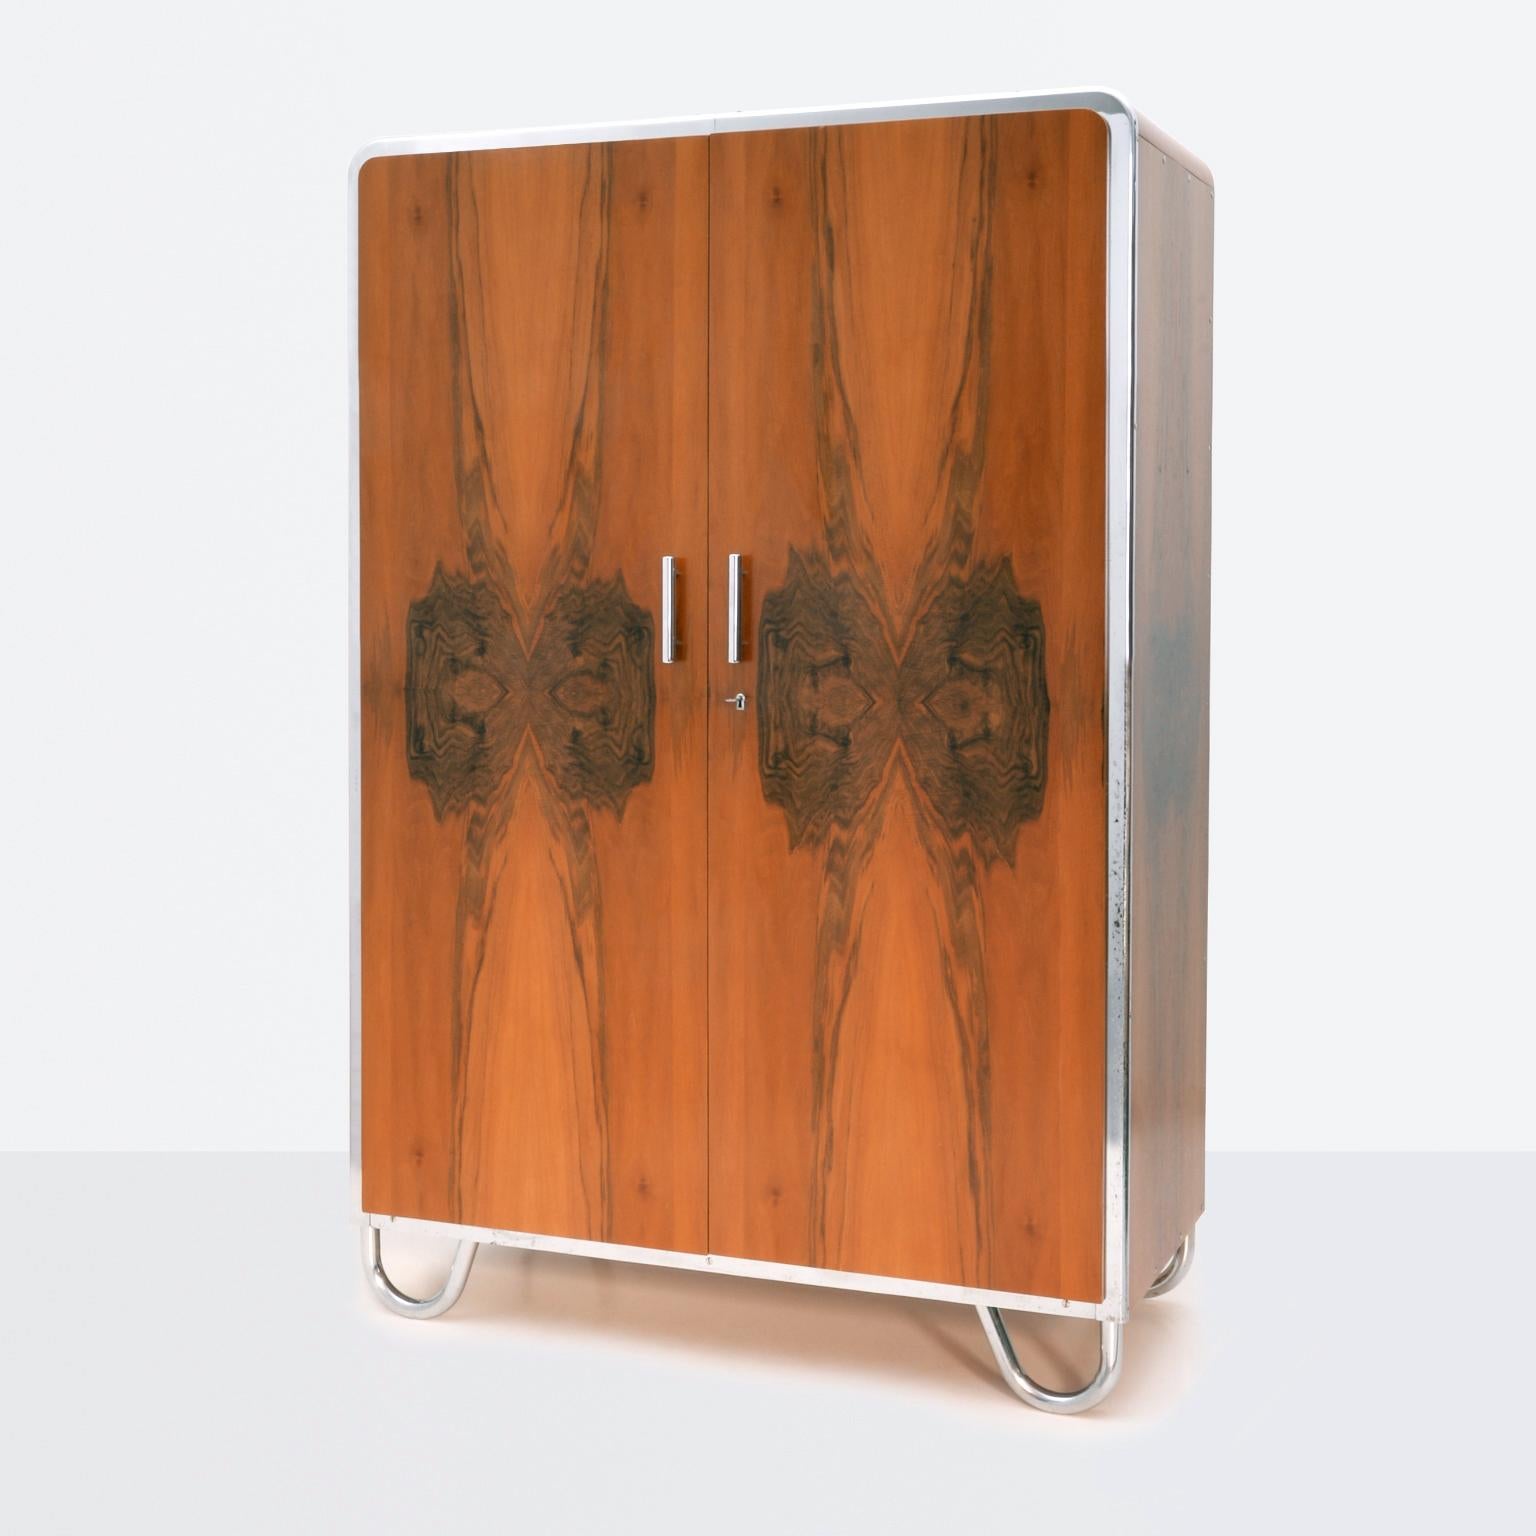 Art Deco- streamline 2-door wardrobe designed by Arch. Hana Kucerová-Záveská (Czech, 1904–1944) and manufactured by Robert Slezák Company, circa 1935. The outstanding form of this wardrobe is the expression of a modern and innovative design as